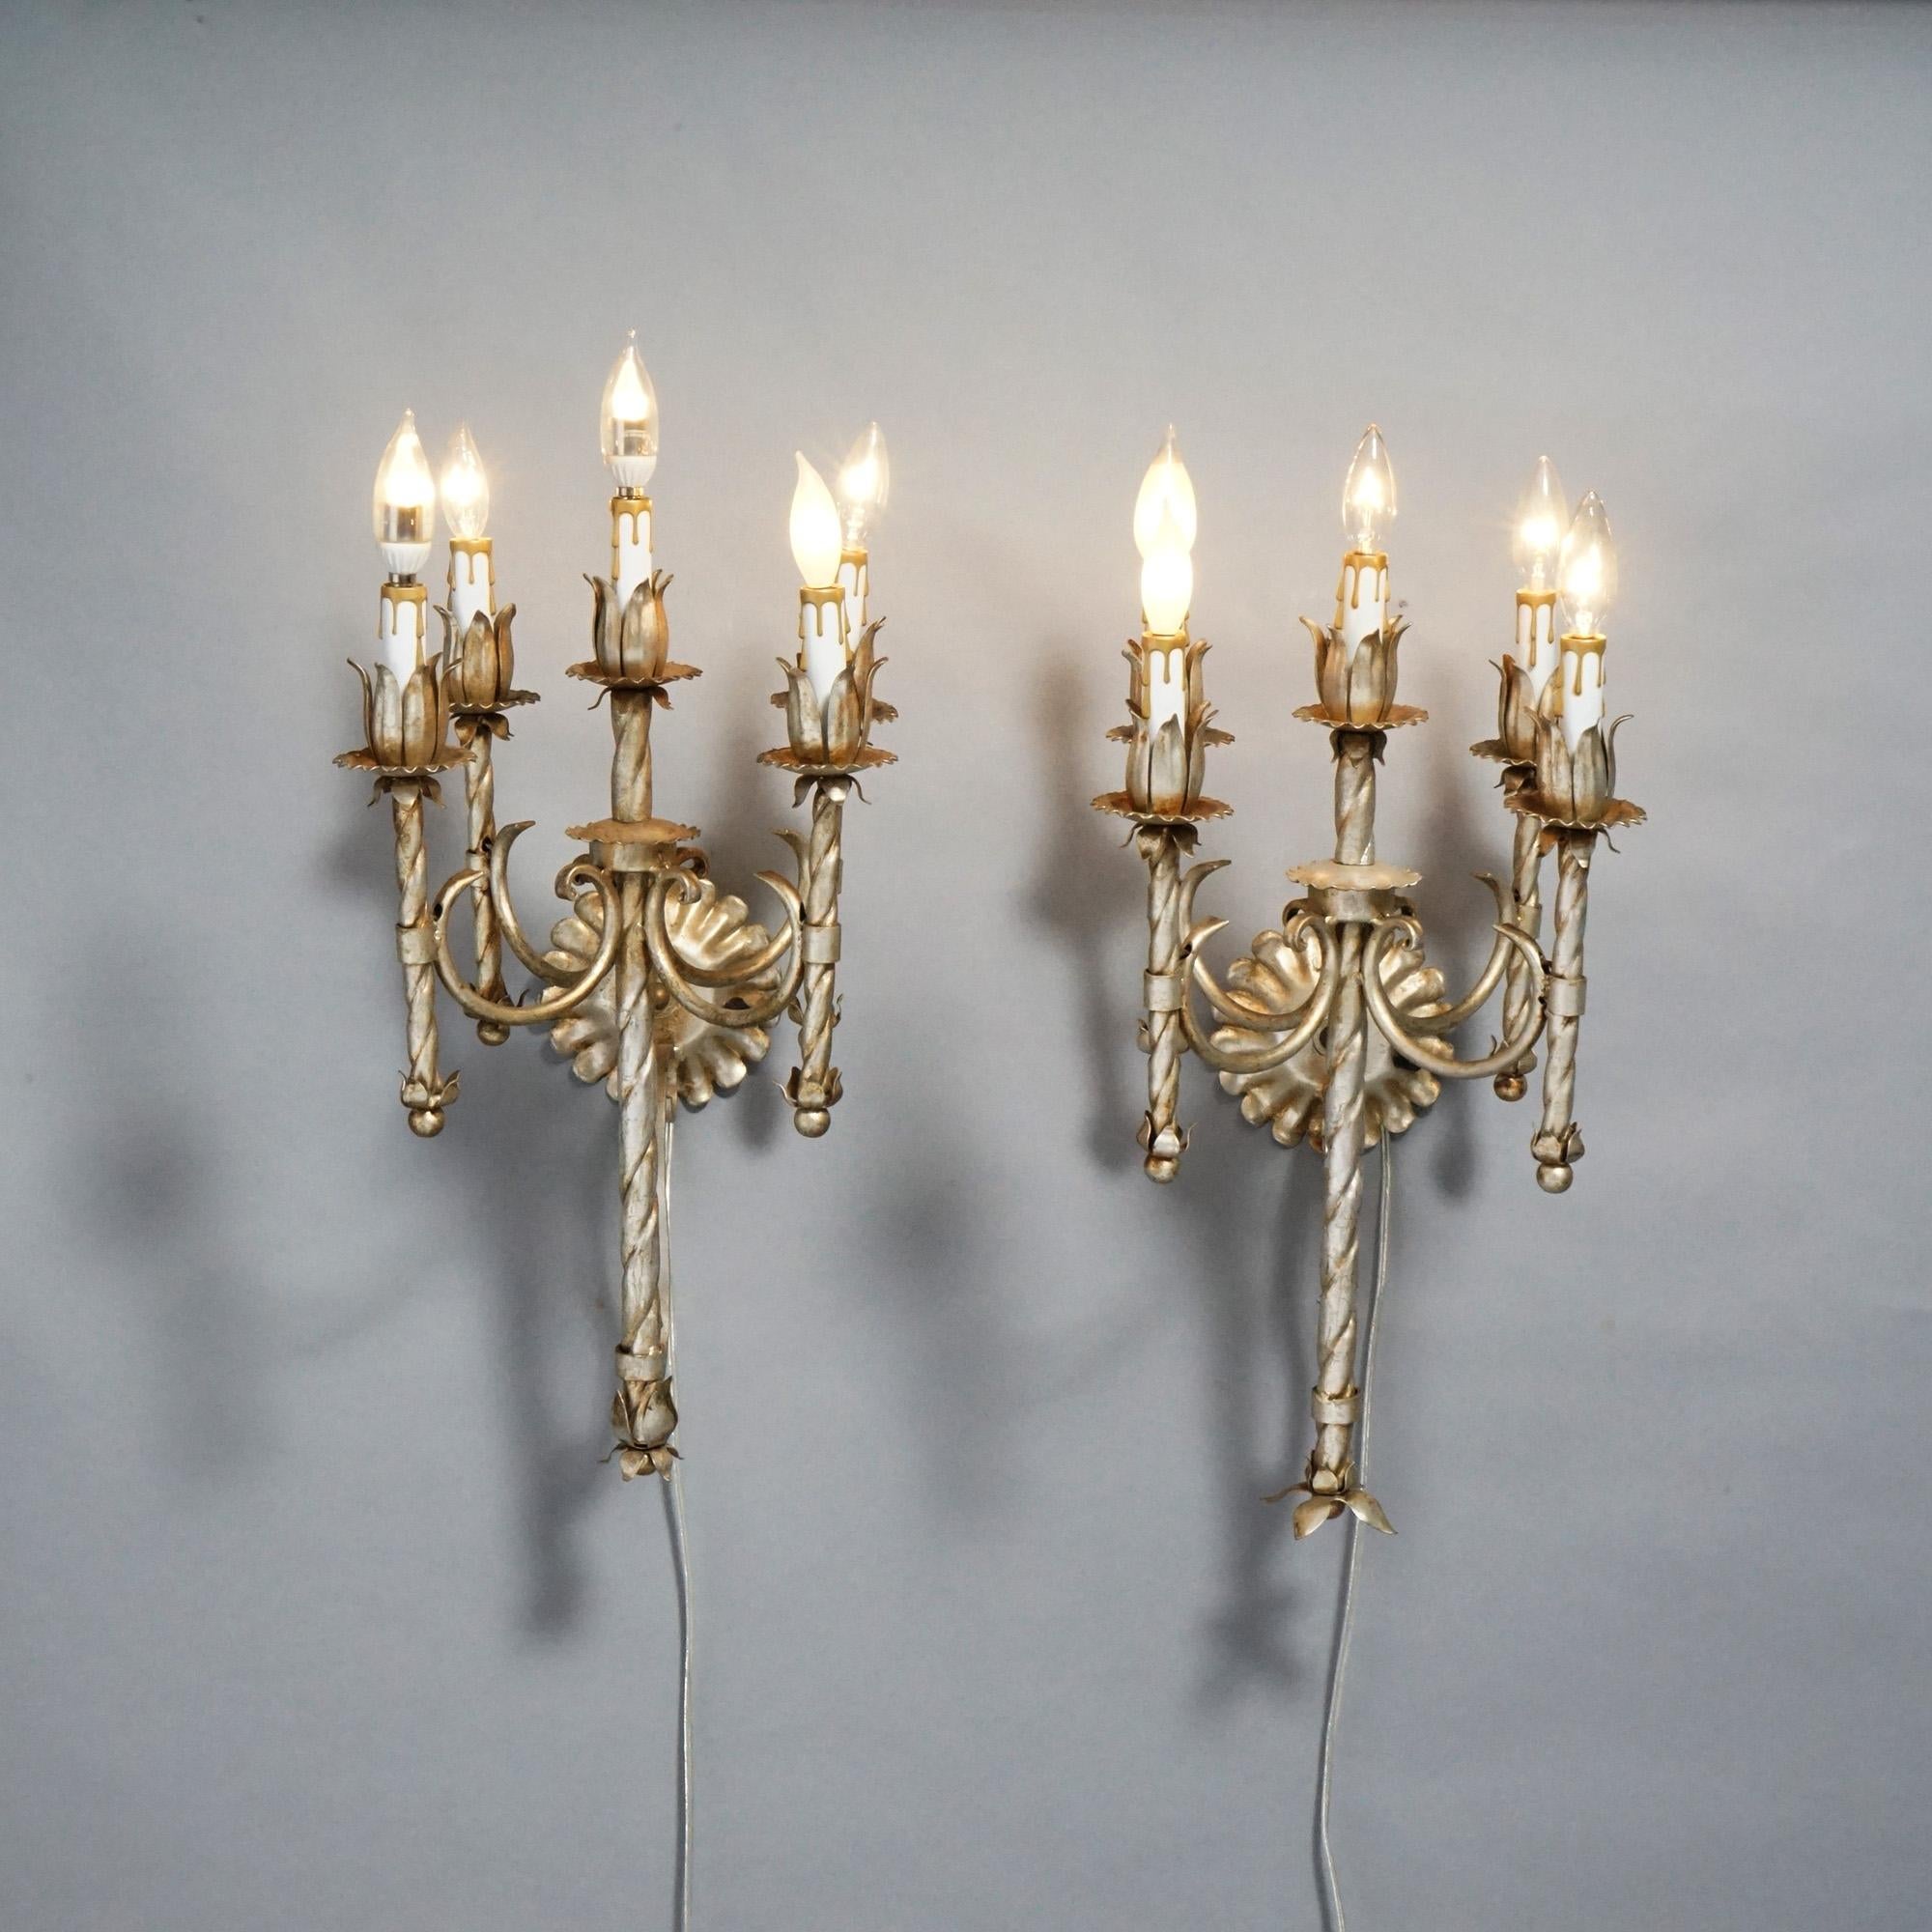 A matching pair of Arts and Crafts candelabra wall sconces offer cast & silvered metal frames with scroll form arms terminating in candle lights with floral receivers, five lights each, 20th century

Measures- 22''H x 11.5''W x 11.5''D.

Catalogue